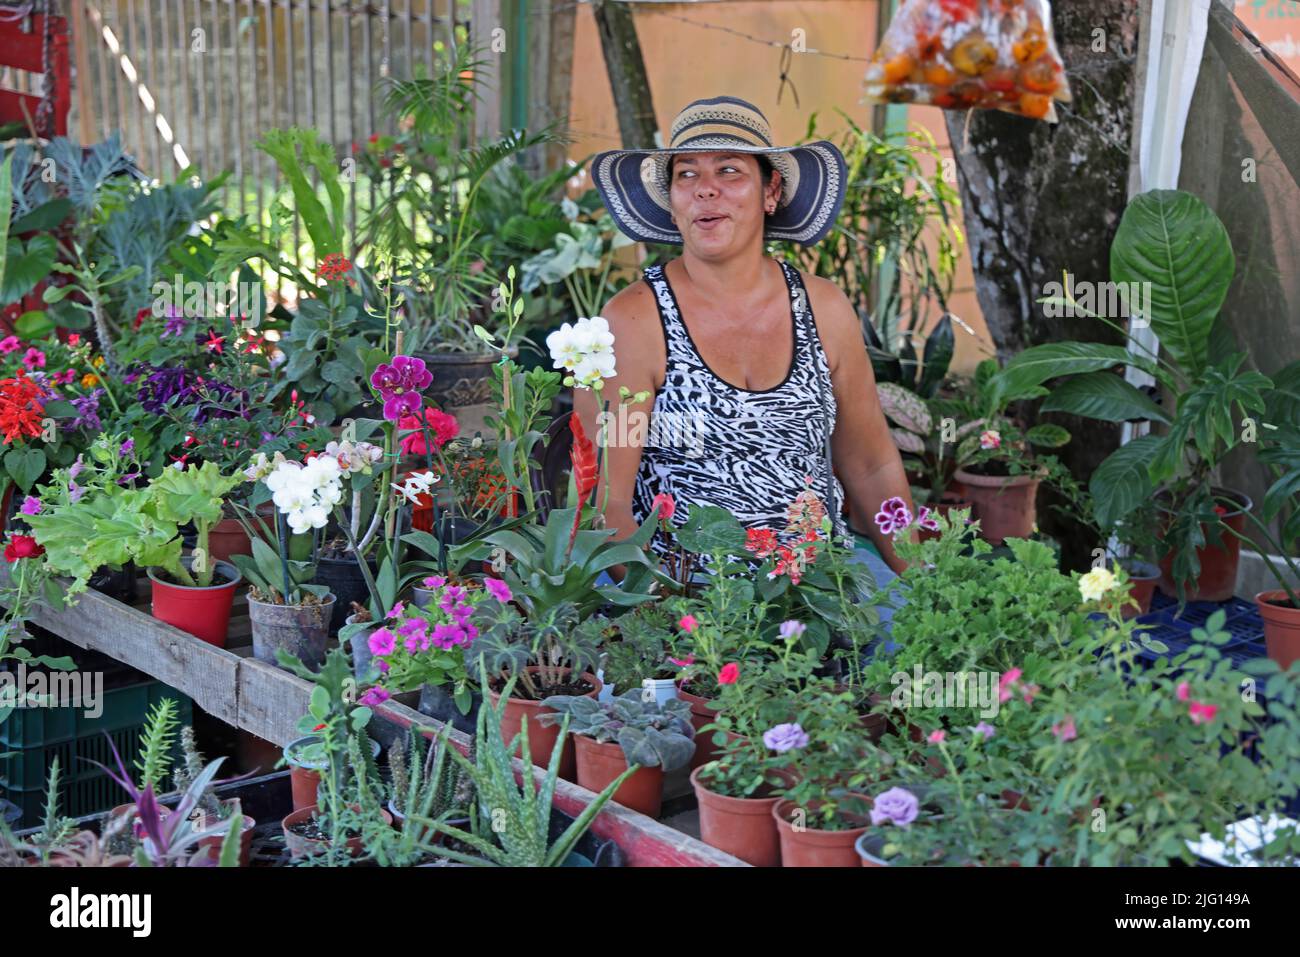 Flower seller at market stall Osa Peninsula, Costa Rica,                    March Stock Photo